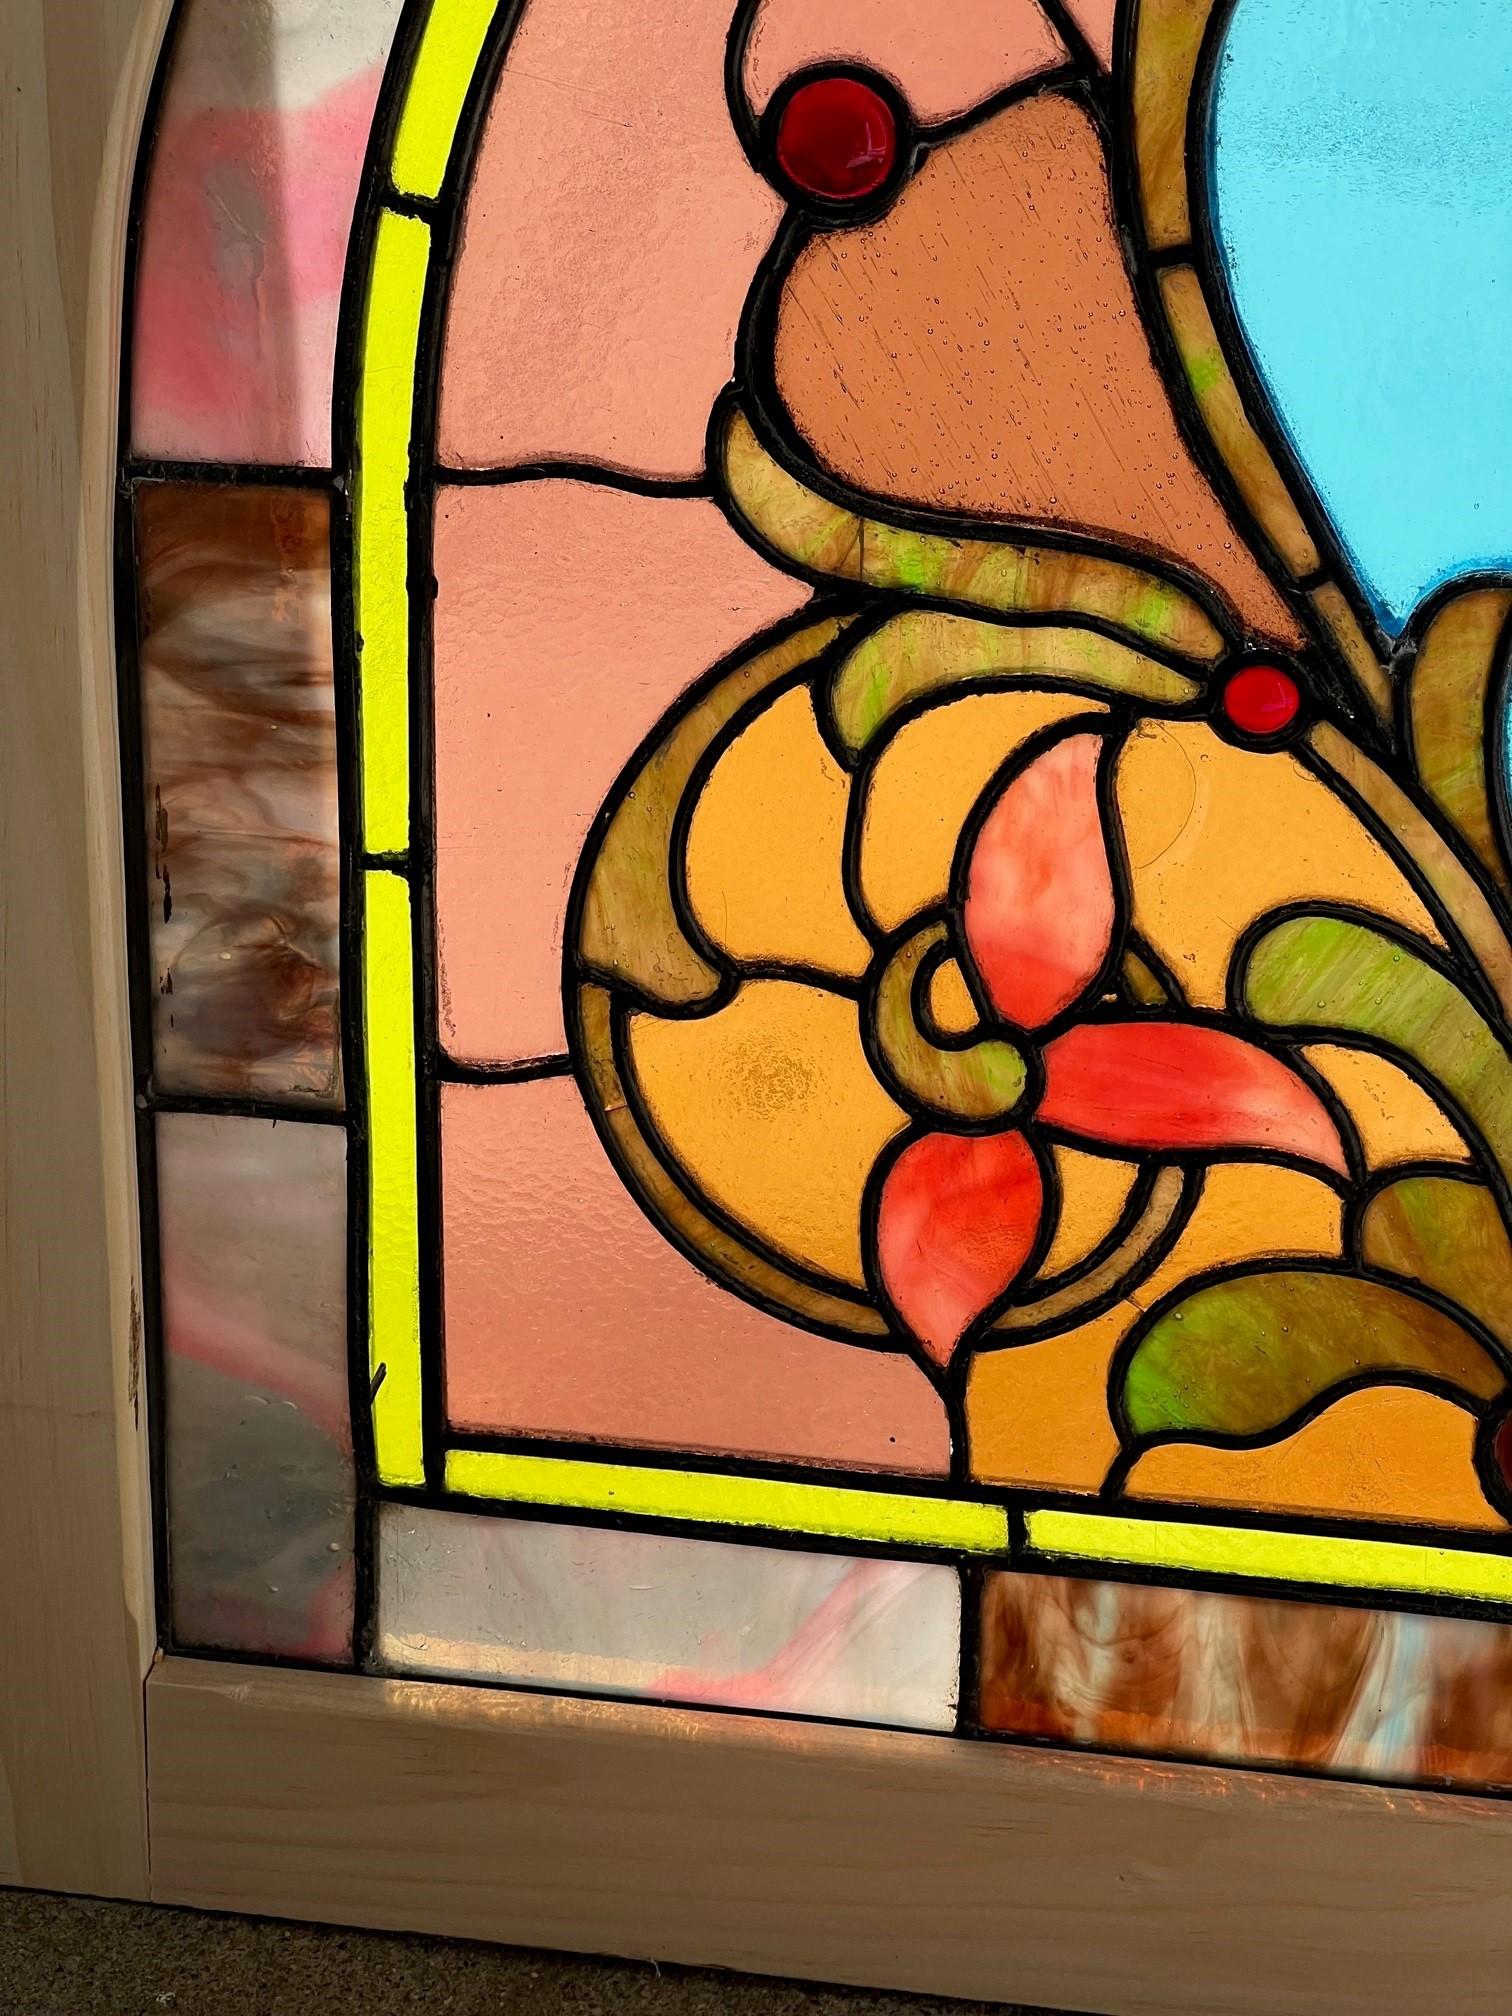 stained glass window frames